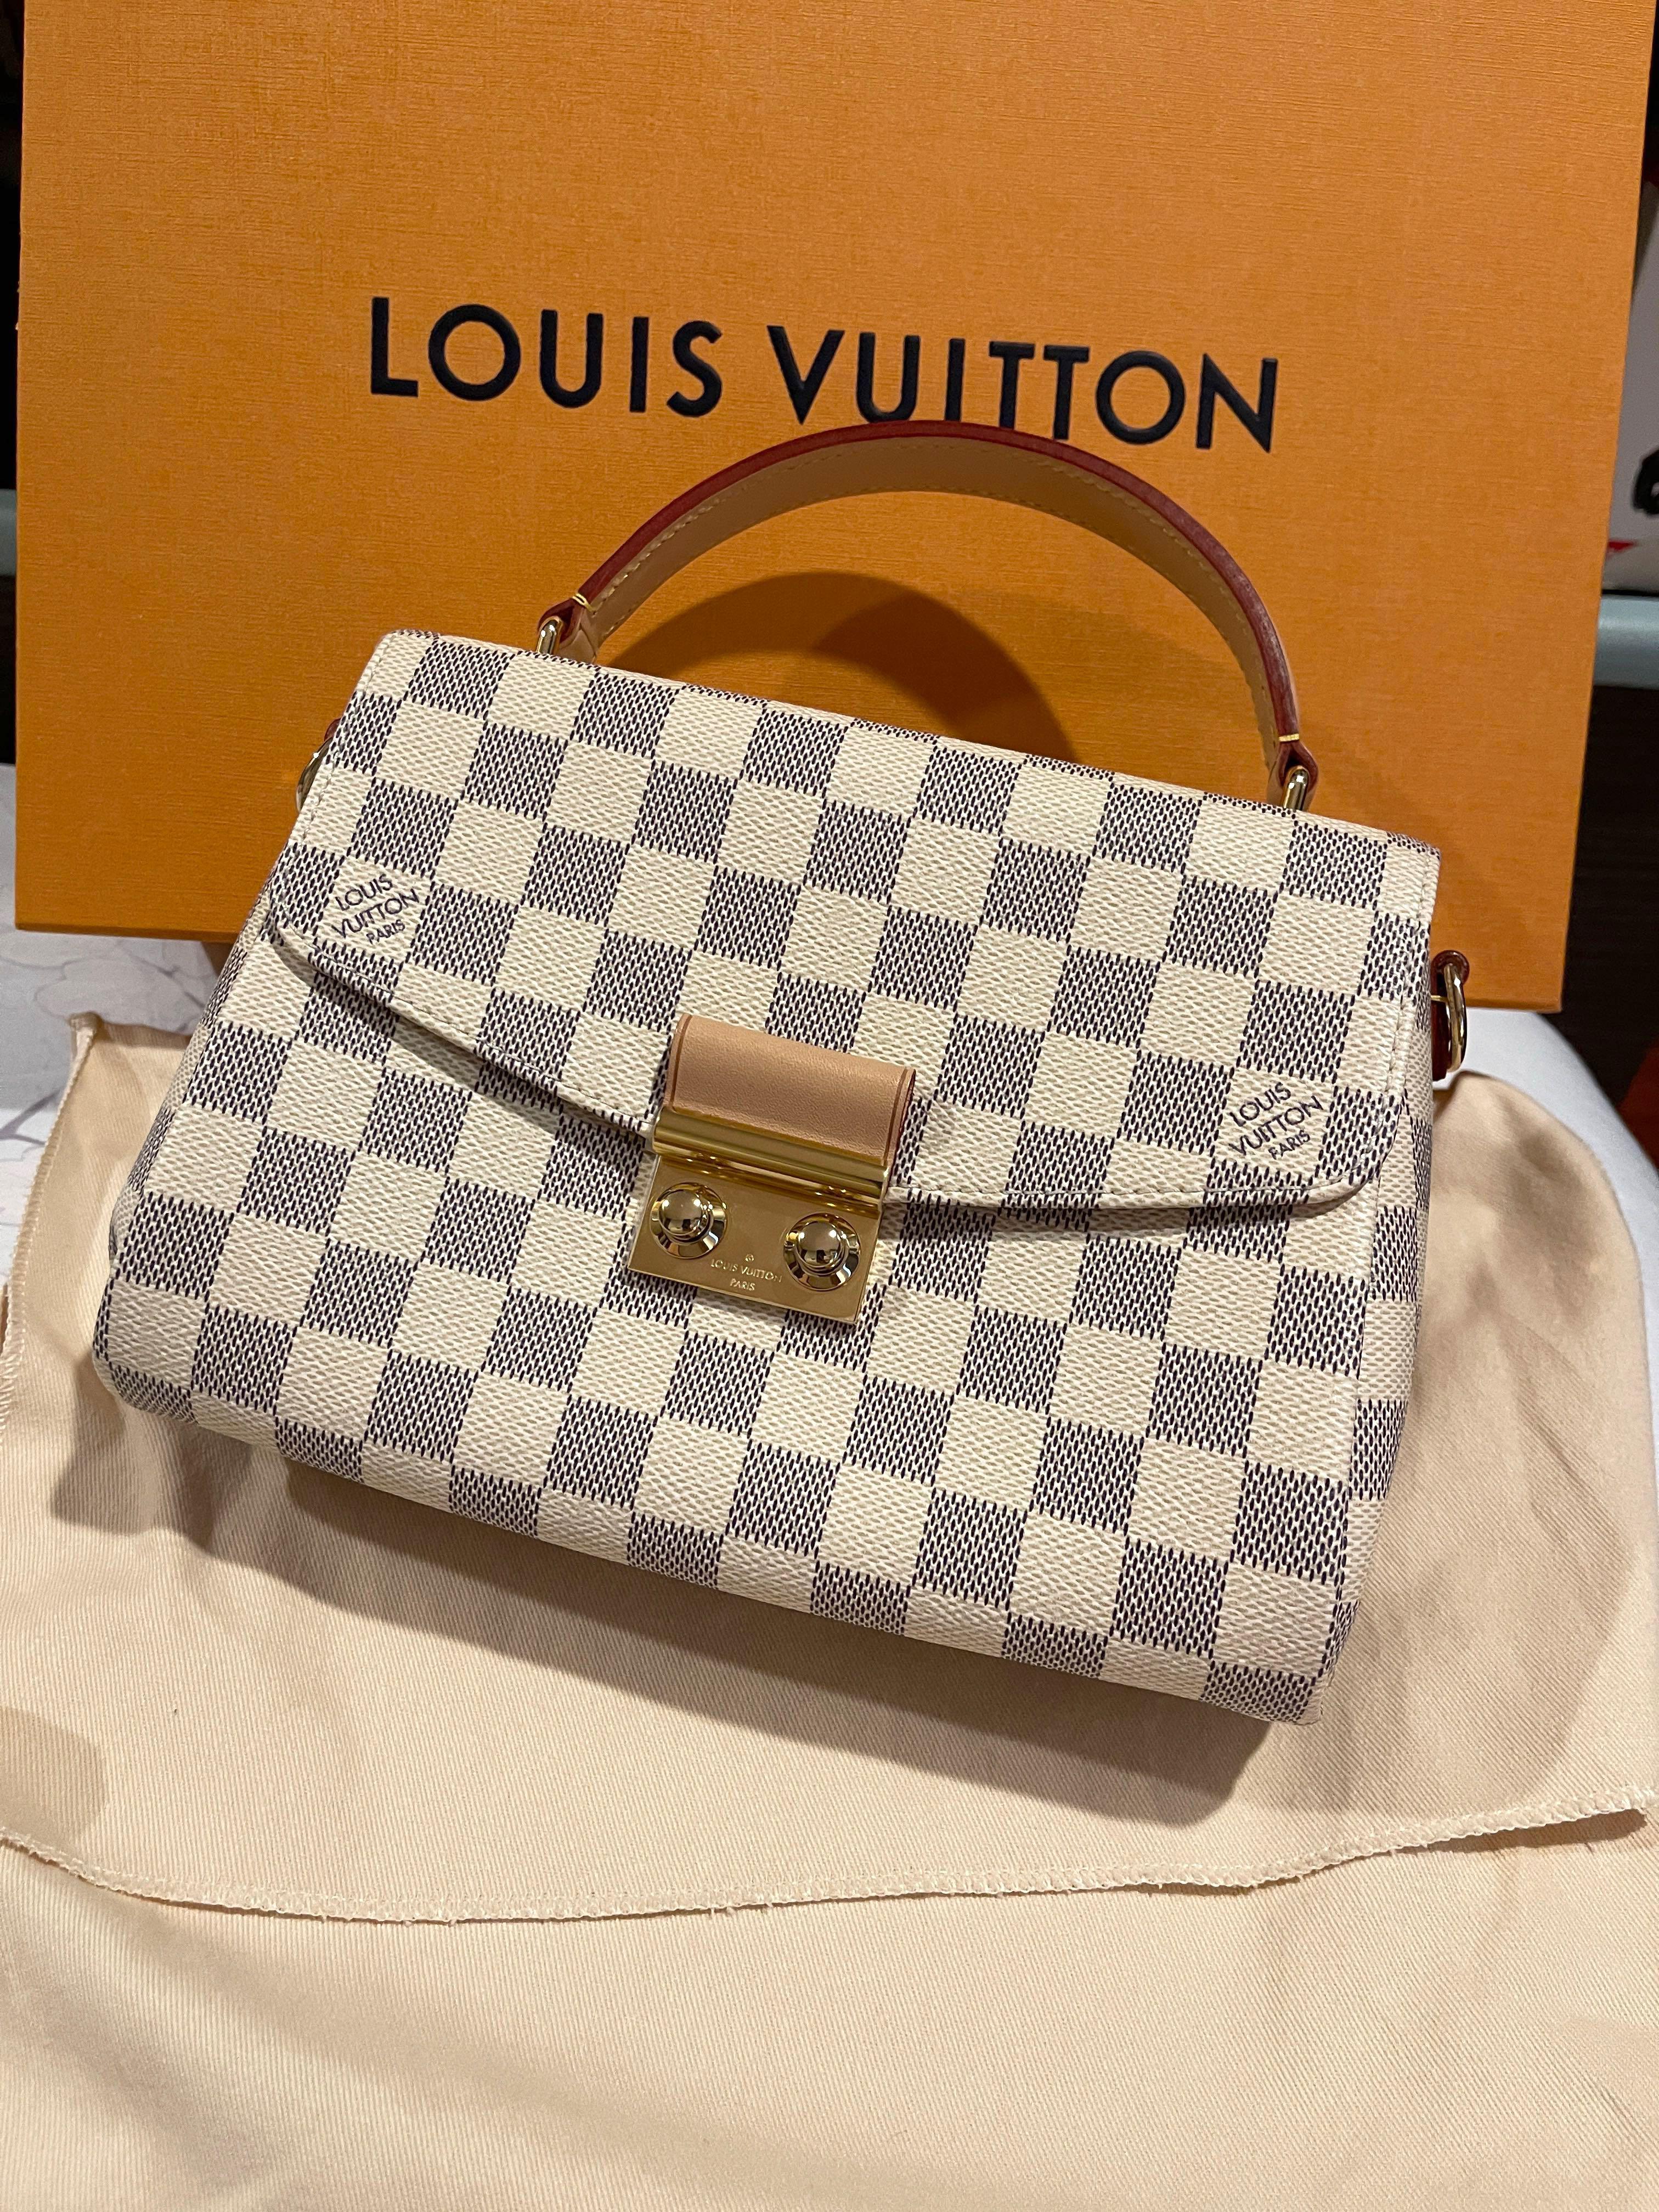 LOUIS VUITTON PASSY BAG UNBOXING & REVIEW + WHAT'S IN MY PURSE